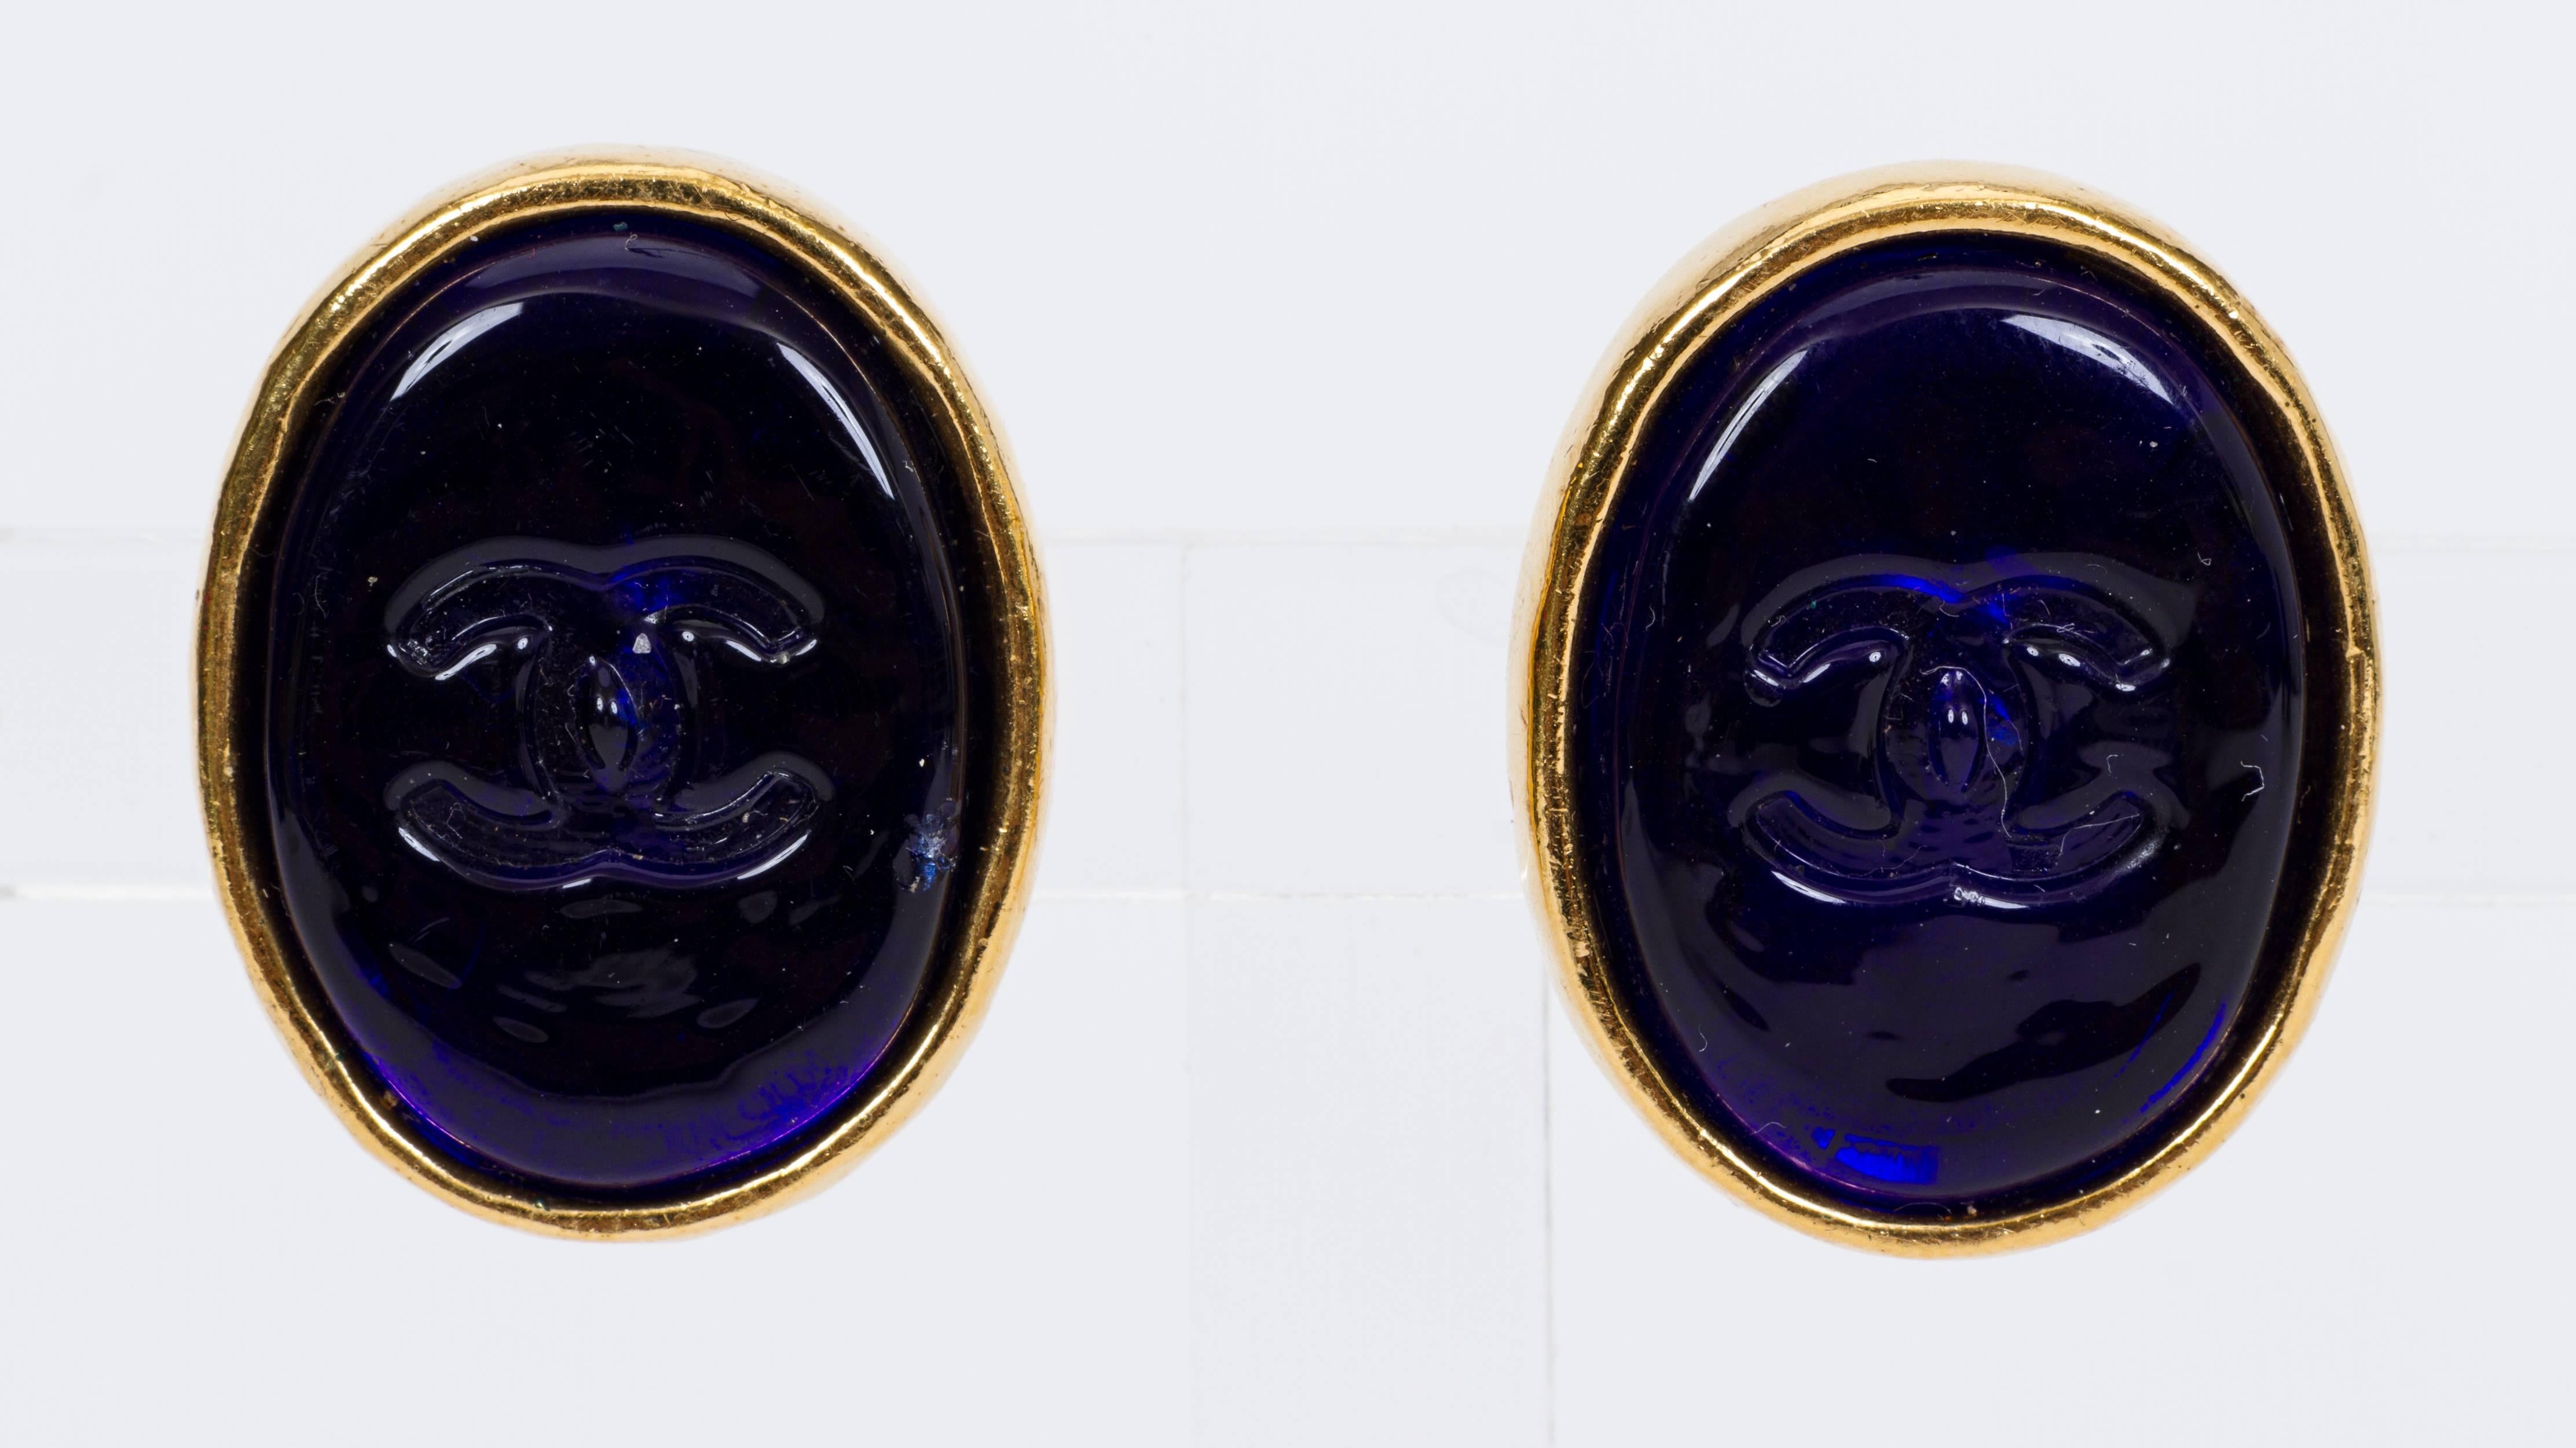 Chanel large oval bleu gripoix seal logo clip earrings. Autumn 93 collection. Come with original box.
